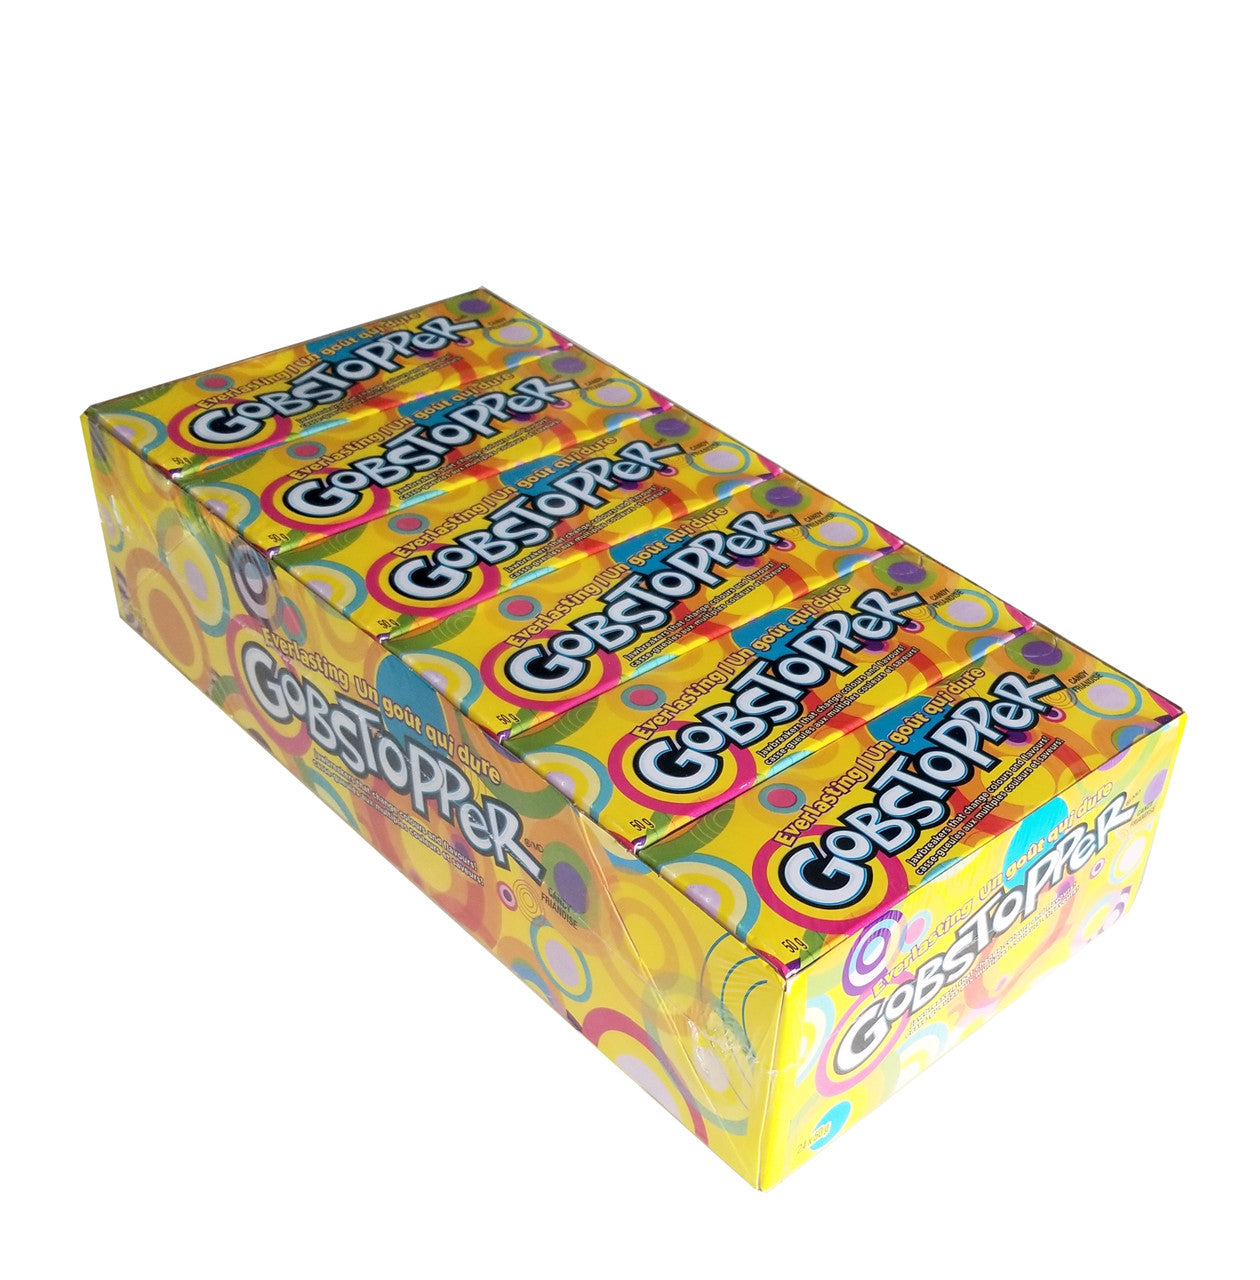 Everlasting Gobstopper Jawbreaker Candy, 24 x 50g/1.75 oz. Boxes (Imported from Canada)